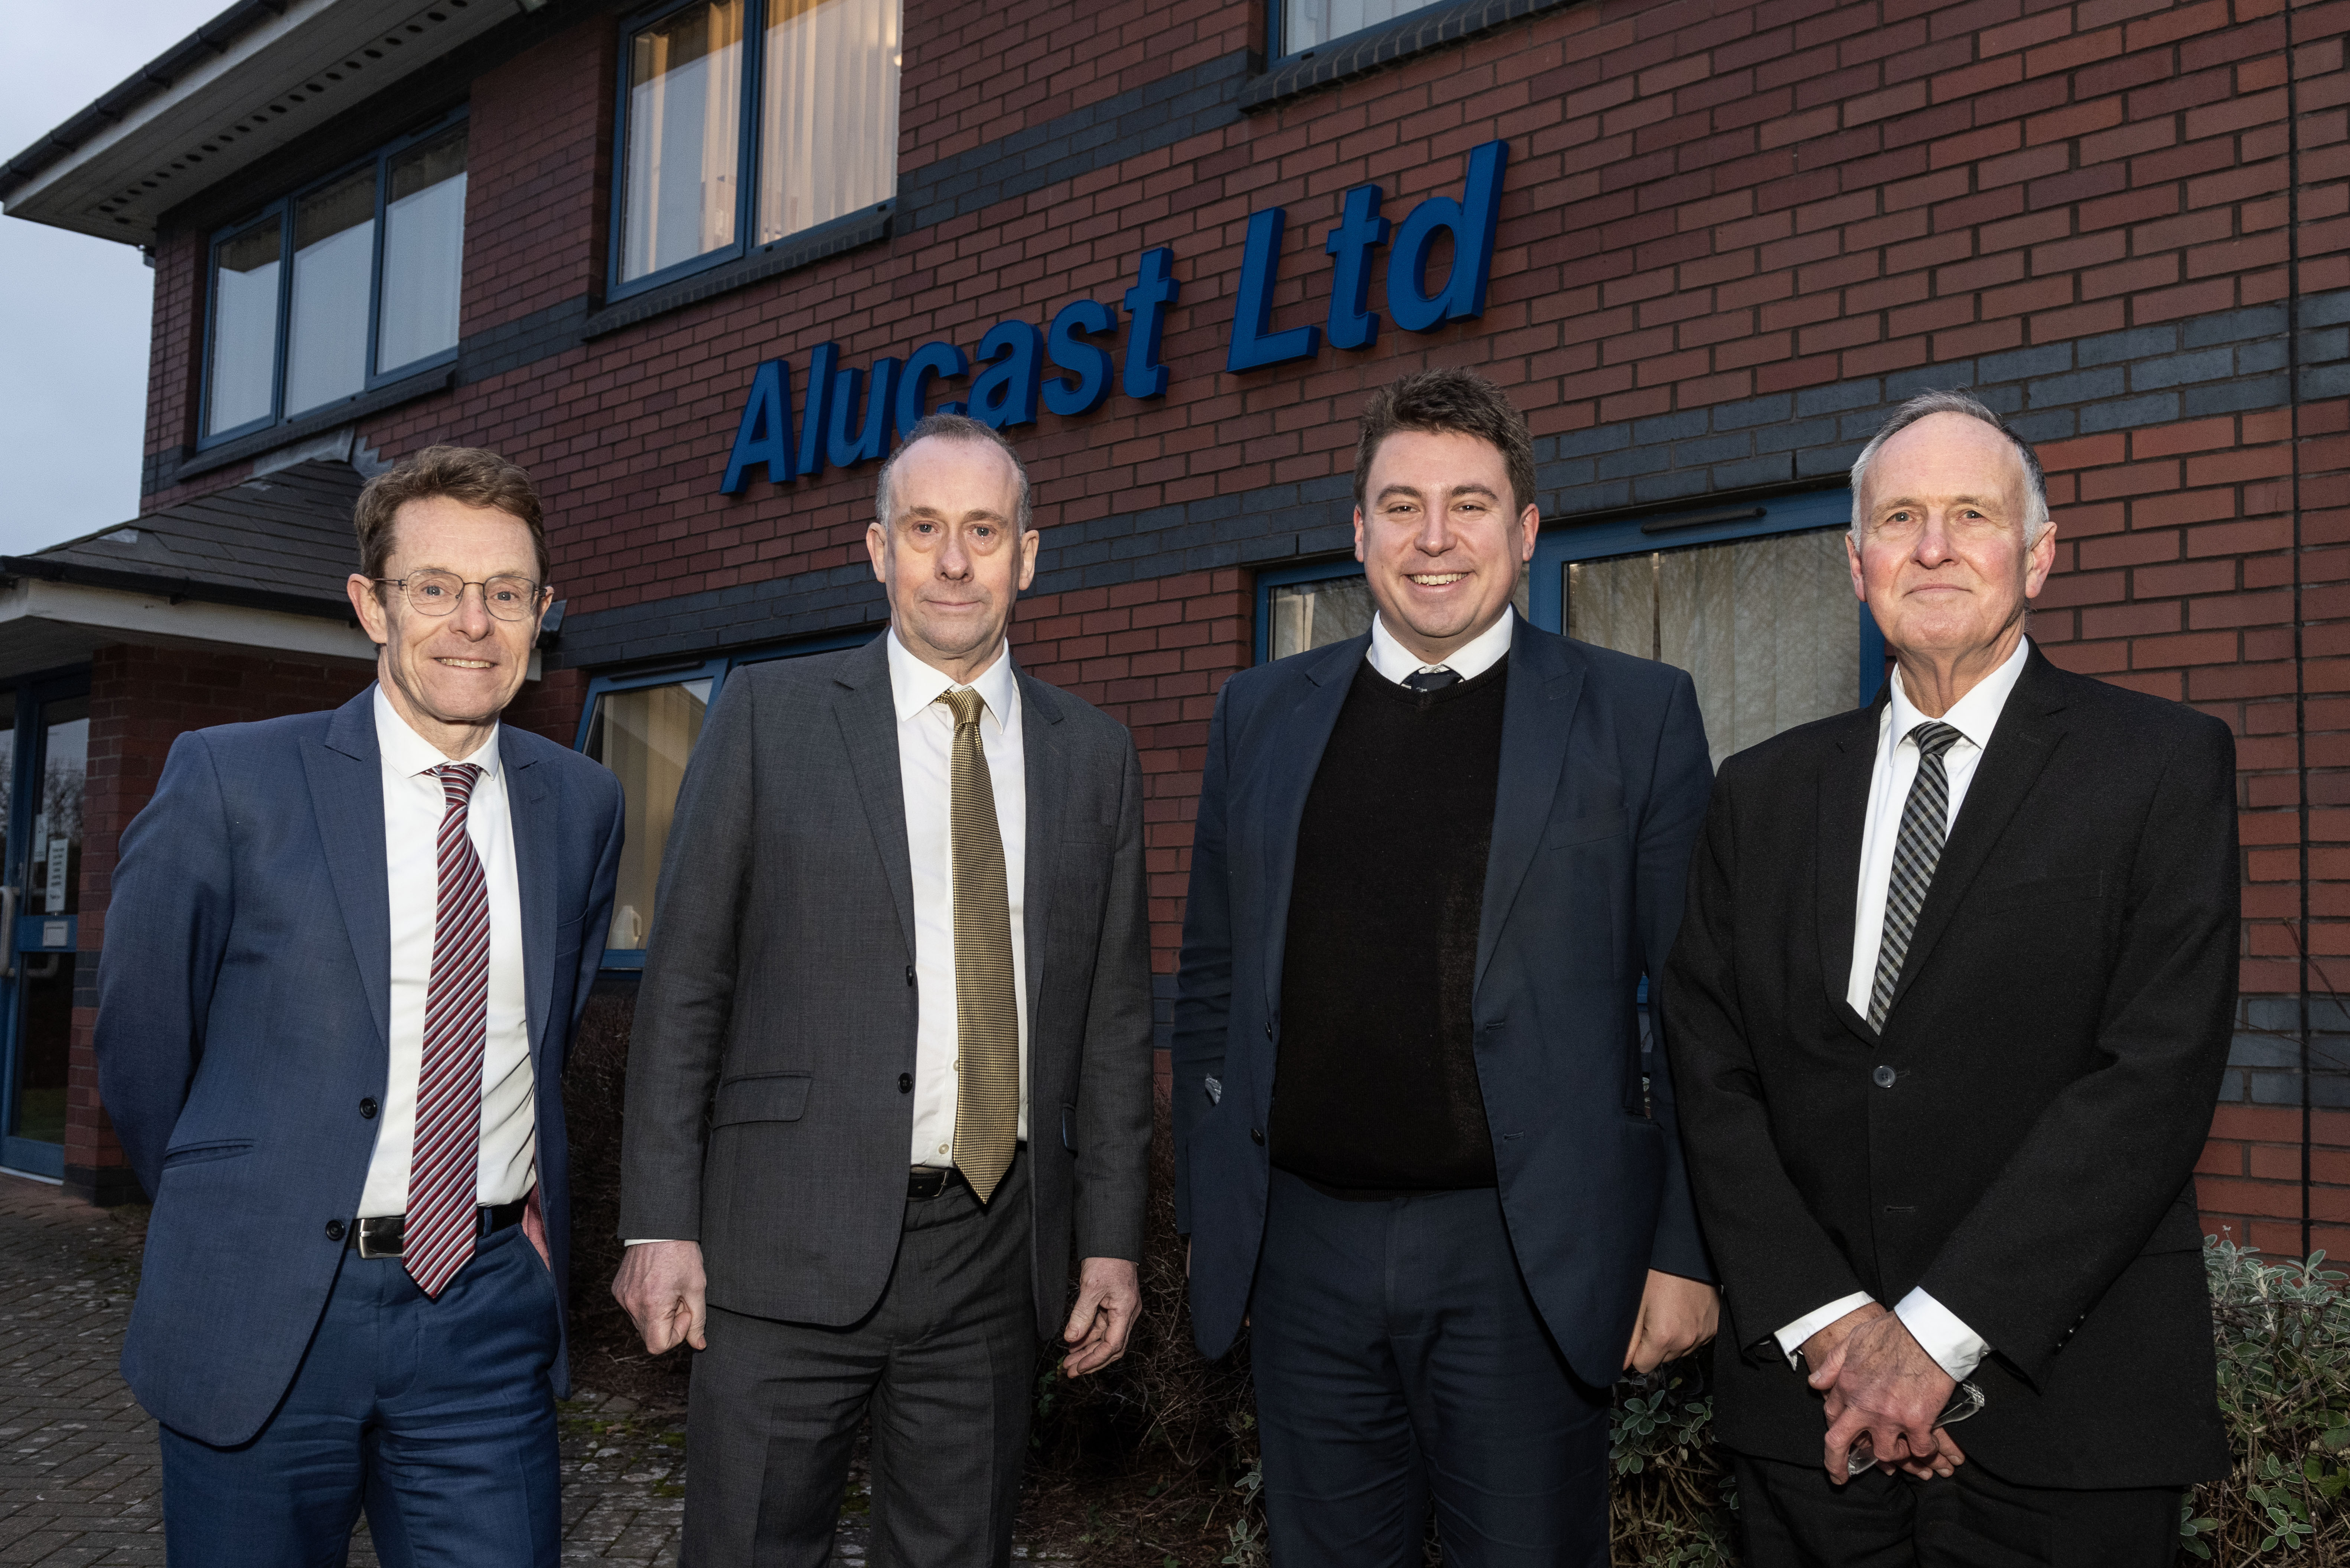 Mayor Andy Street, Lord Callanan, Minister for Business, Energy and Corporate Responsibility, West Bromwich West MP Shaun Bailey and West Midlands and Alucast Chairman Tony Sartorius standing outside the Alucast premises in Wednesbury